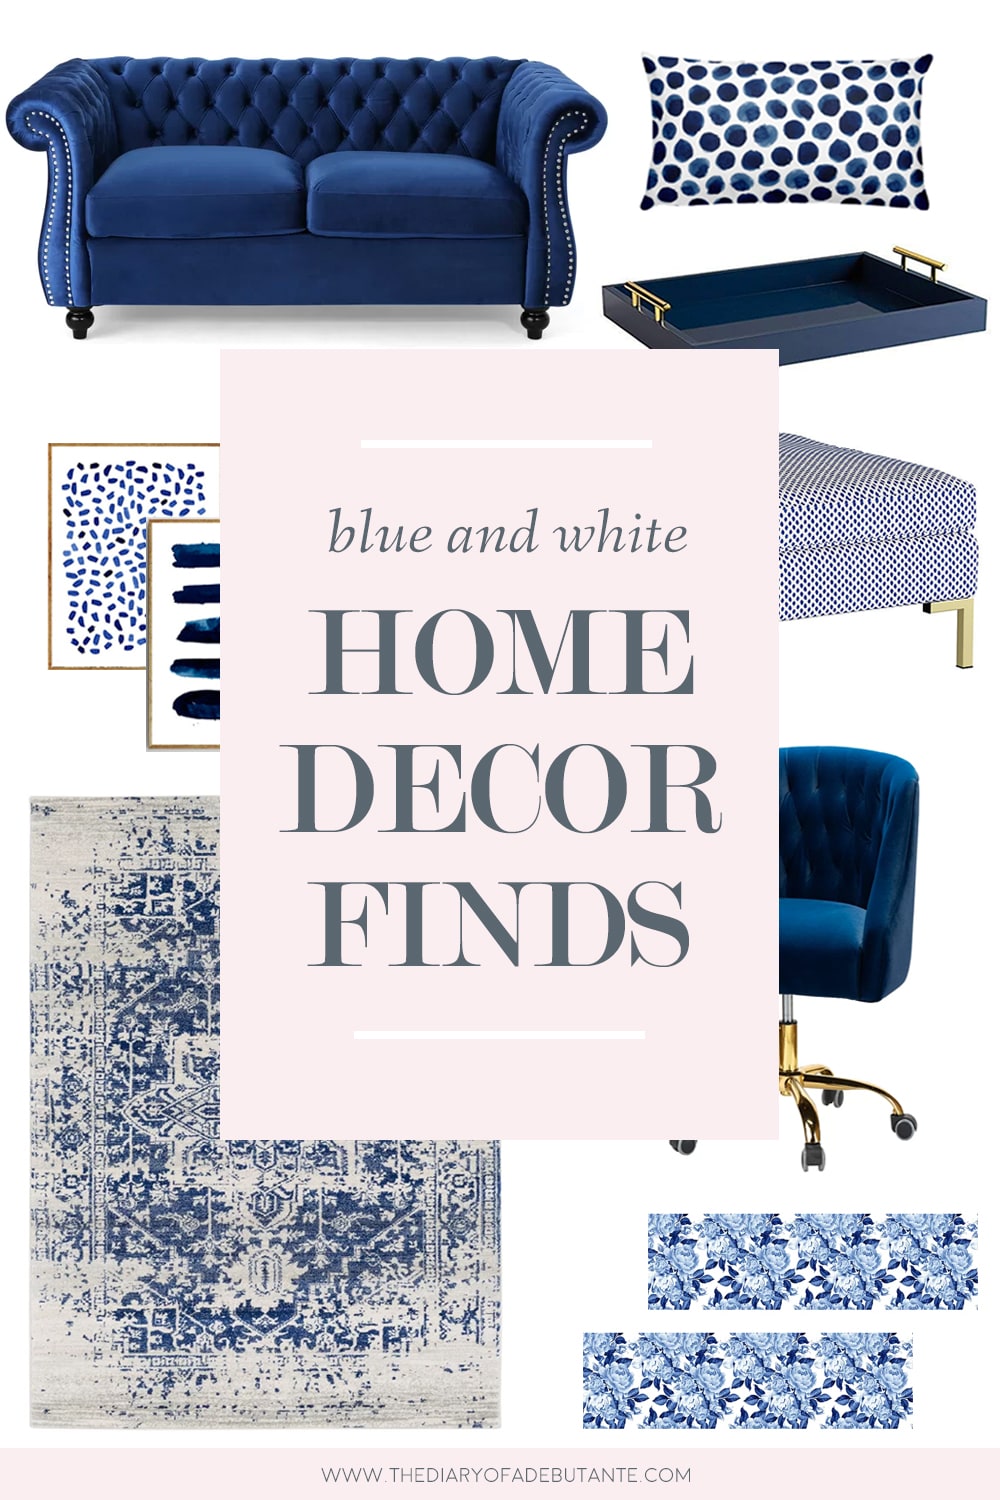 Affordable Home Decor: Blue and White Home Accessories for Spring by Stephanie Ziajka from the affordable fashion and southern lifestyle blog Diary of a Debutante